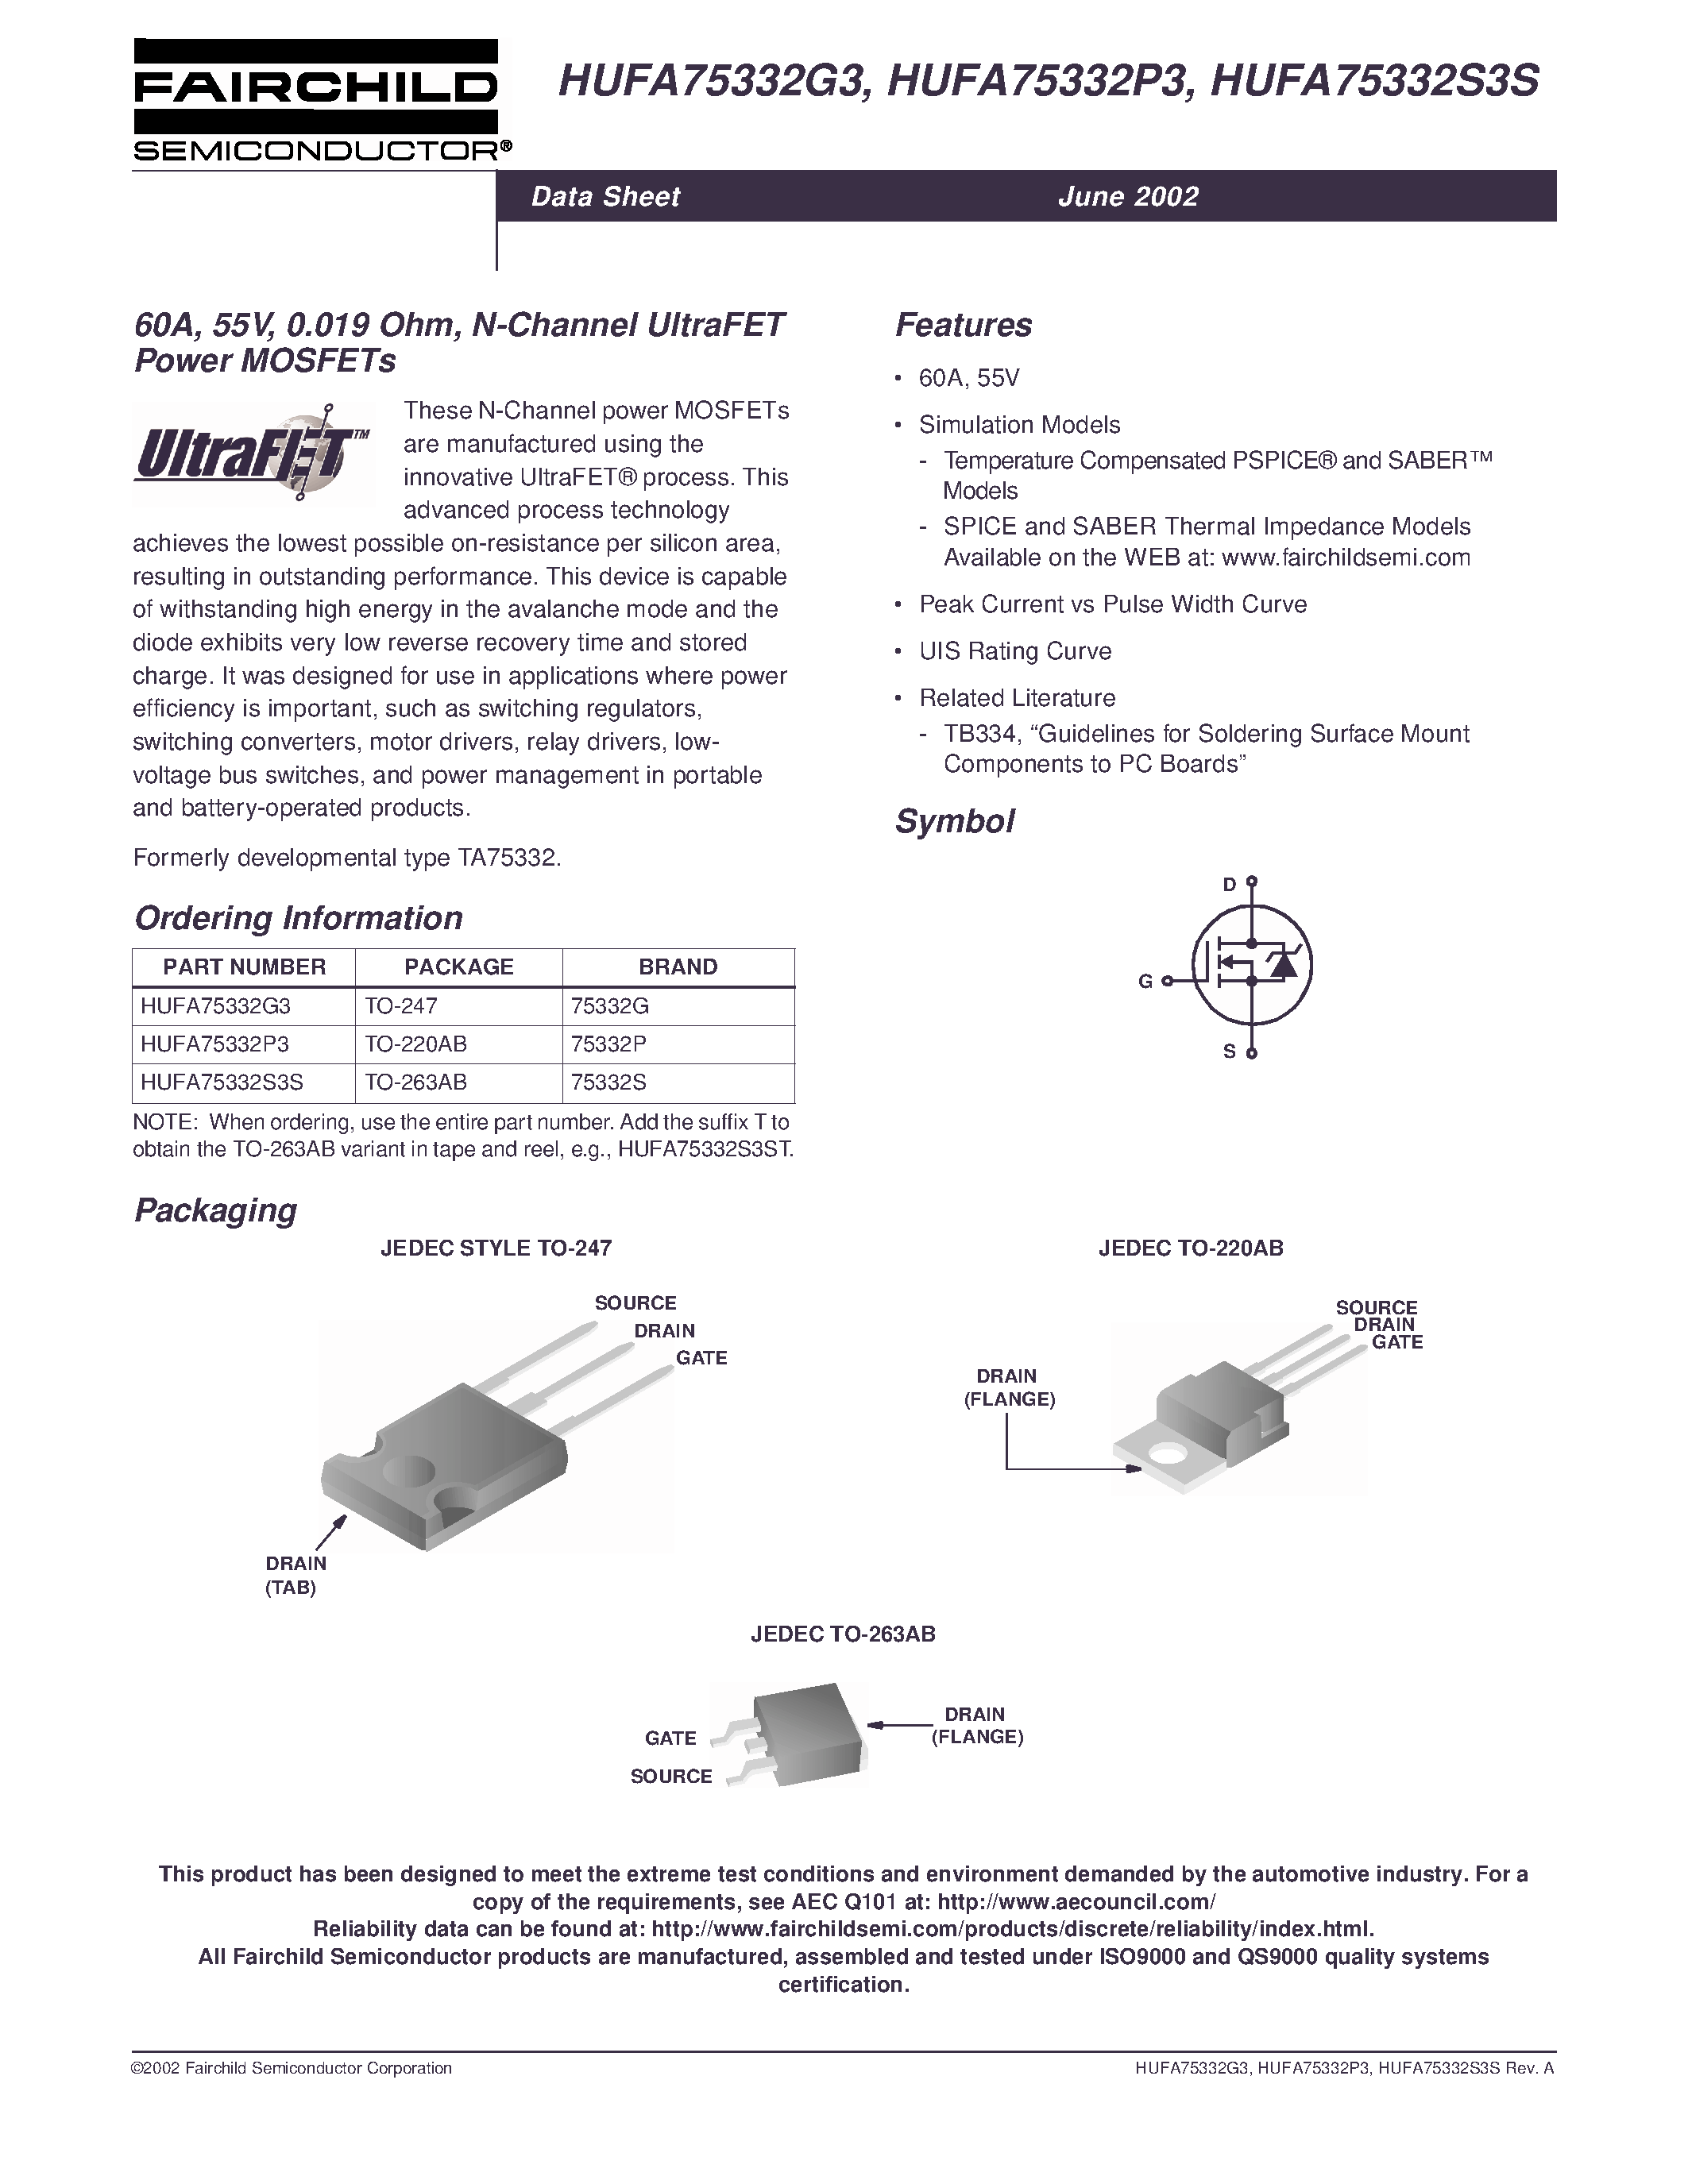 Datasheet HUFA75337G3 - 75A/ 55V/ 0.014 Ohm/ N-Channel UltraFET Power MOSFETs page 1